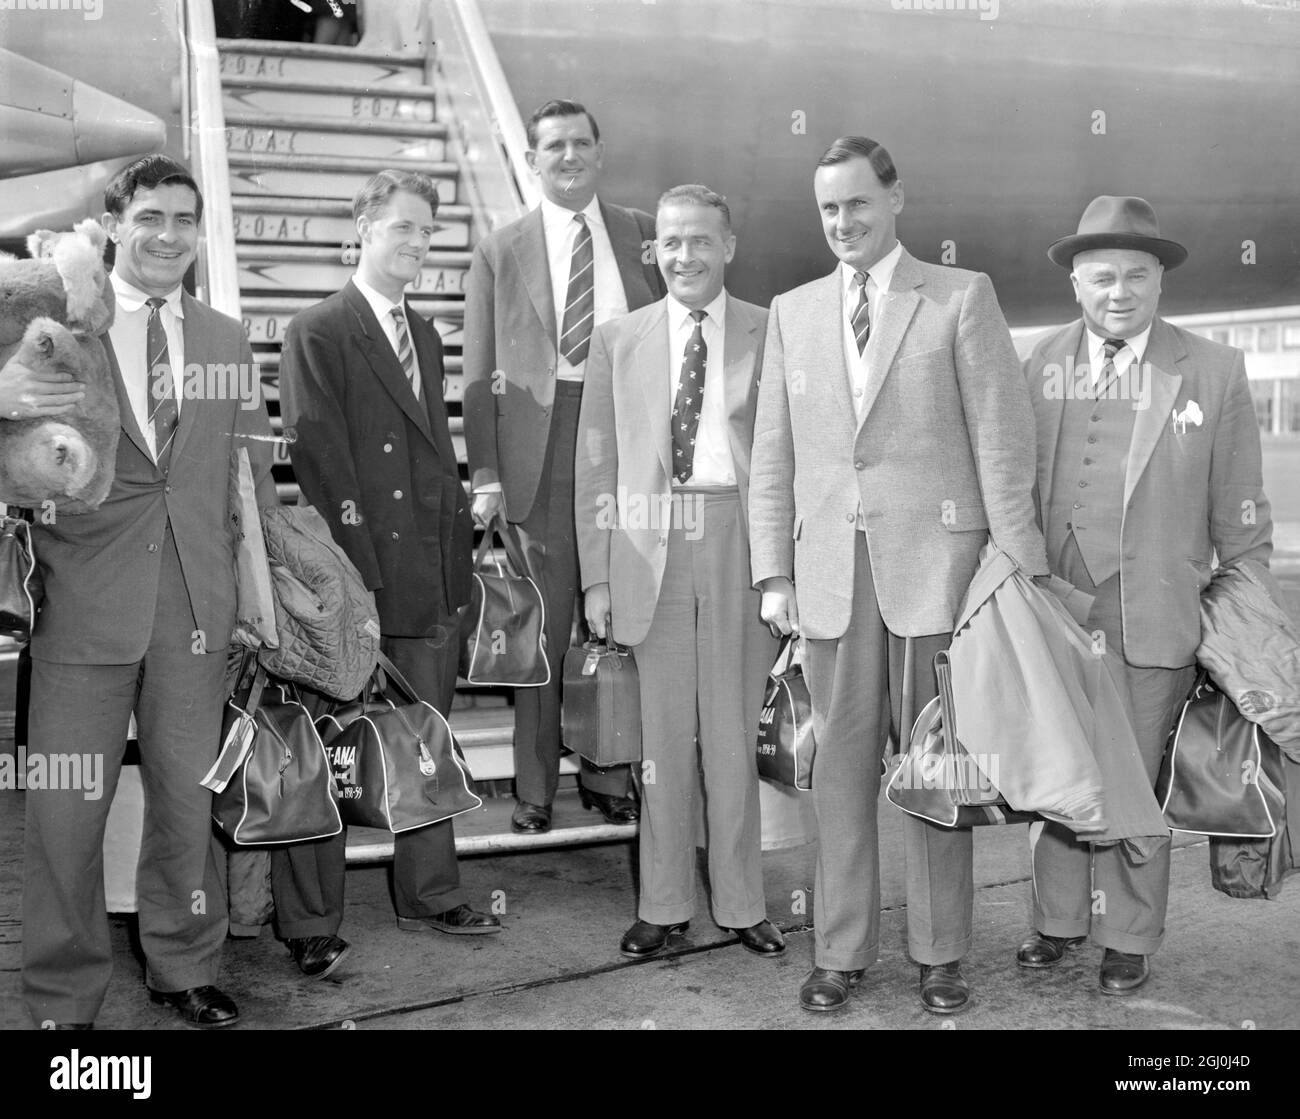 London: more of the England cricketers arrived at London Airport today, following their cricketing tour of Australia and New Zealand Left to Right at the Airport are, Feddie Truman; John Mortimore; Tom Graveney; Willie Watson; Captain Peter May, and Baggage Master, George Duckworth. 23 March 1959 Stock Photo